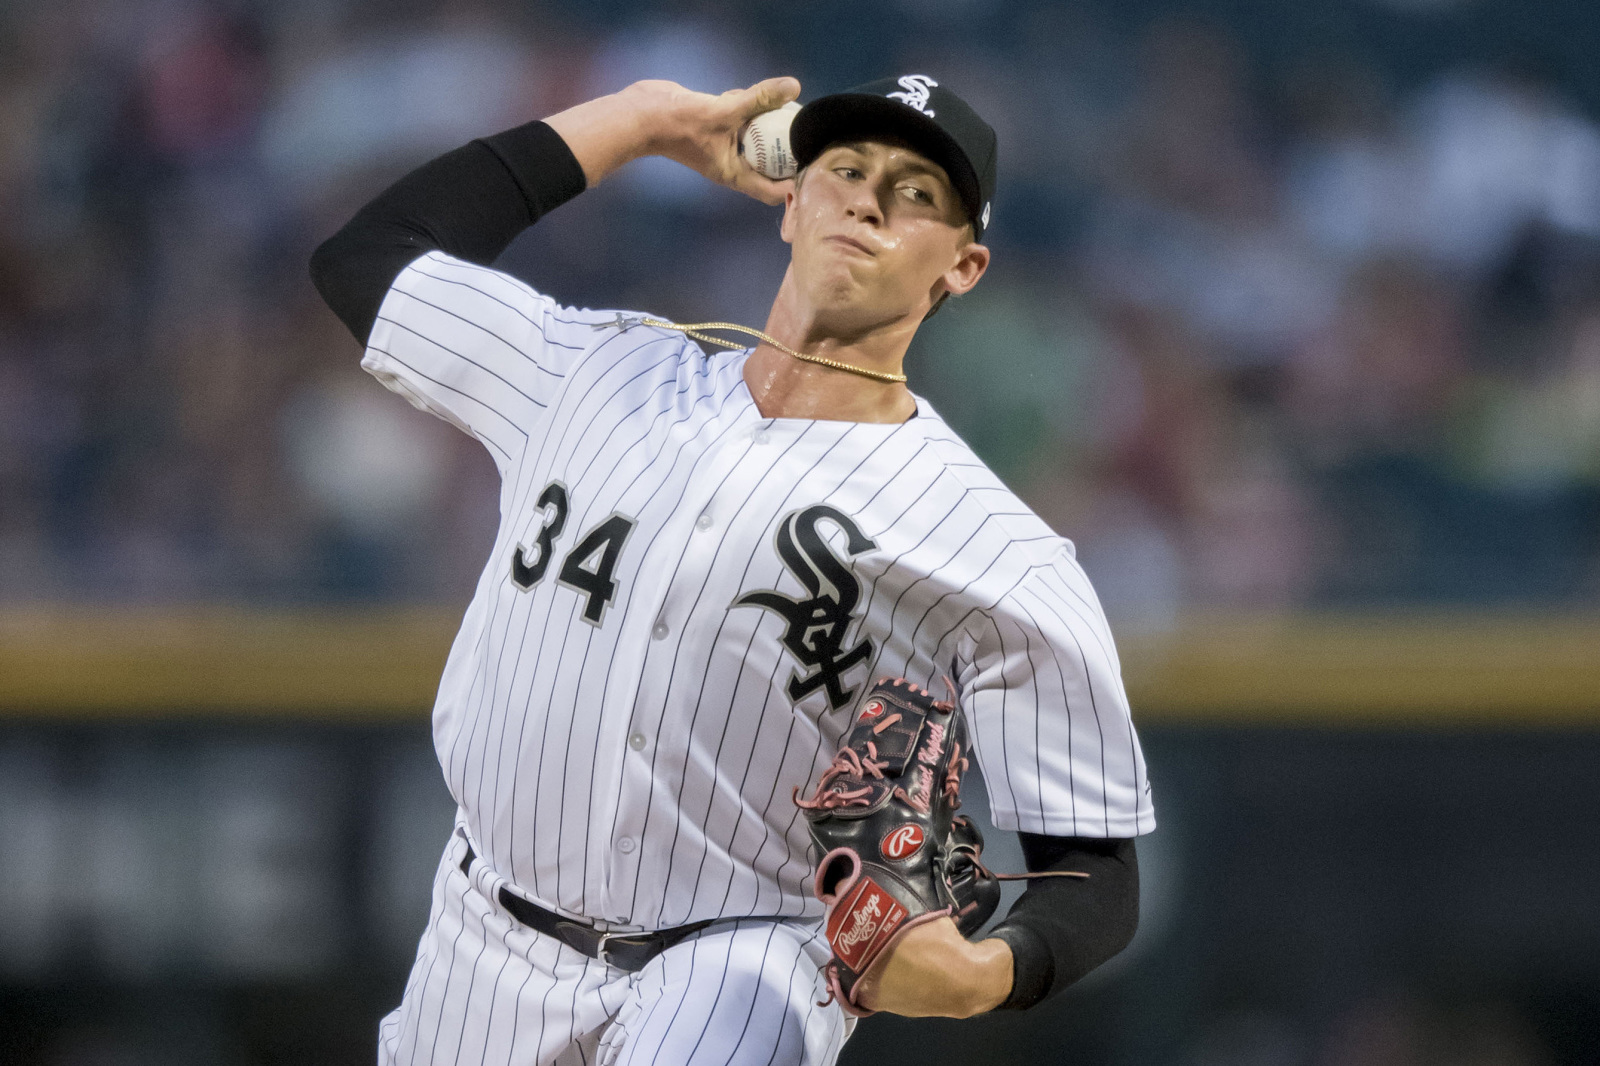 Chicago White Sox: Michael Kopech could start out of the bullpen